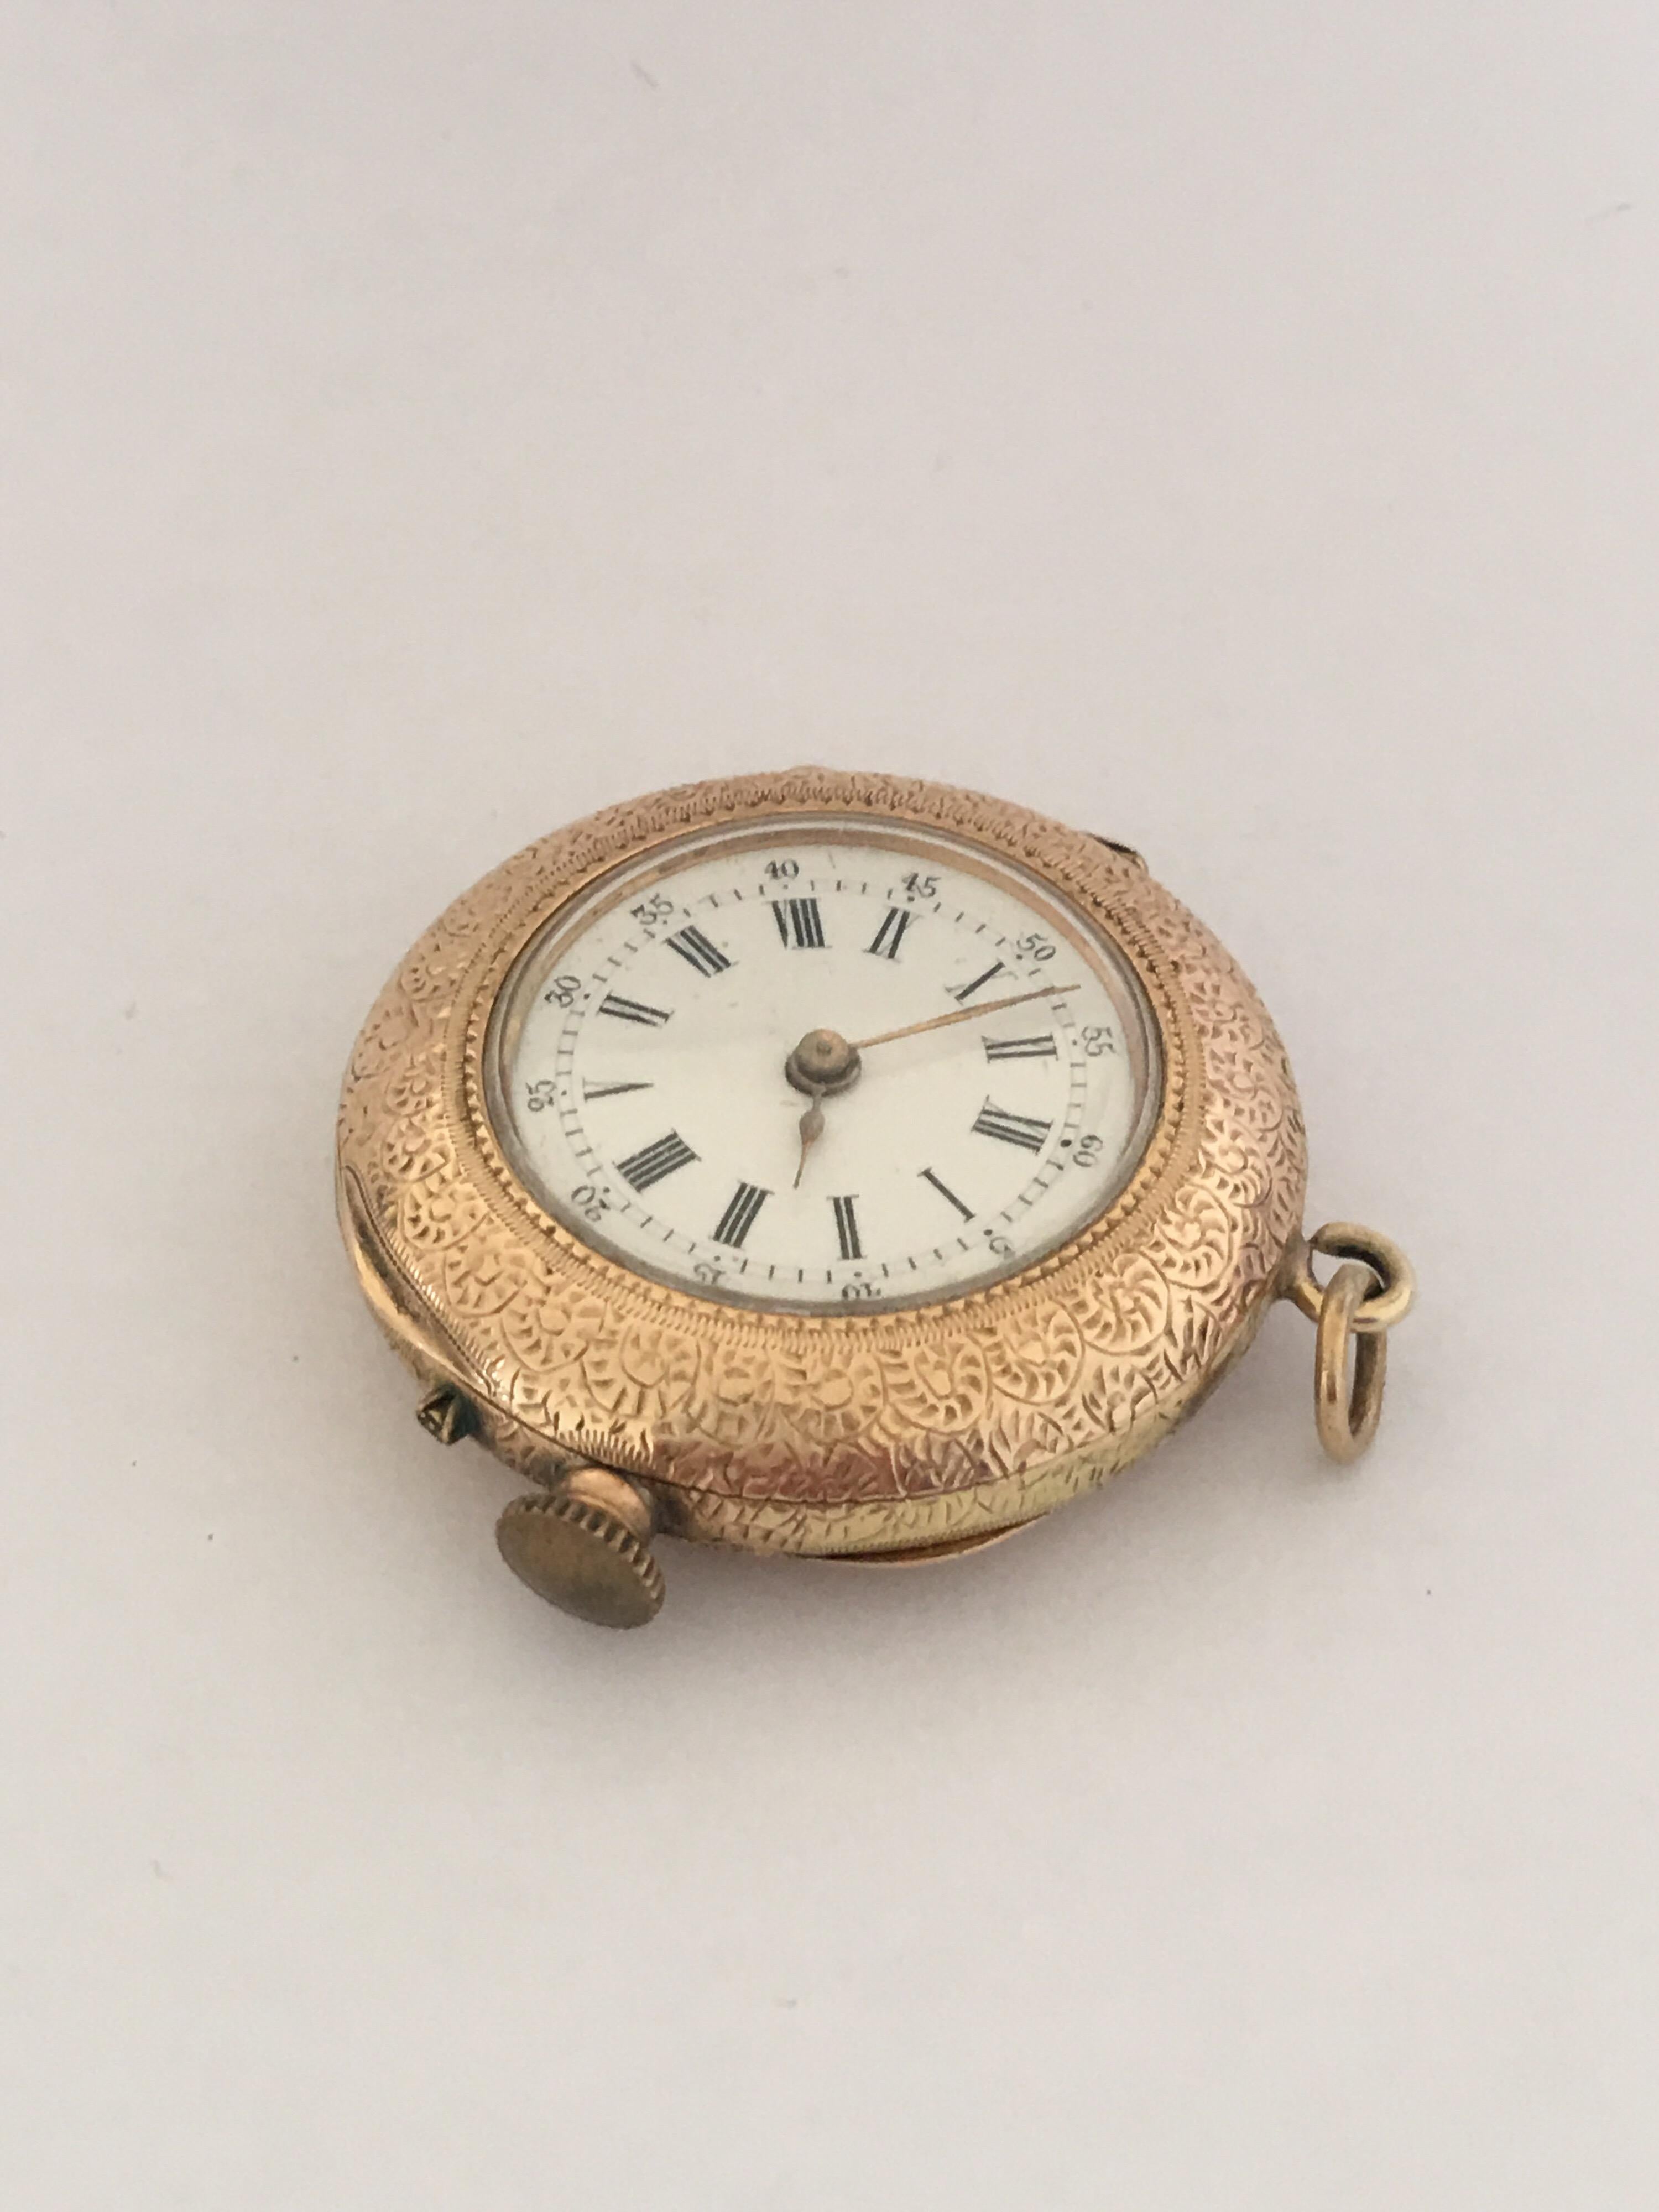 This beautiful gold pendant watch is in good working condition and it is running well. Some signs of ageing and wear. This watch weighed 24.1 grams 